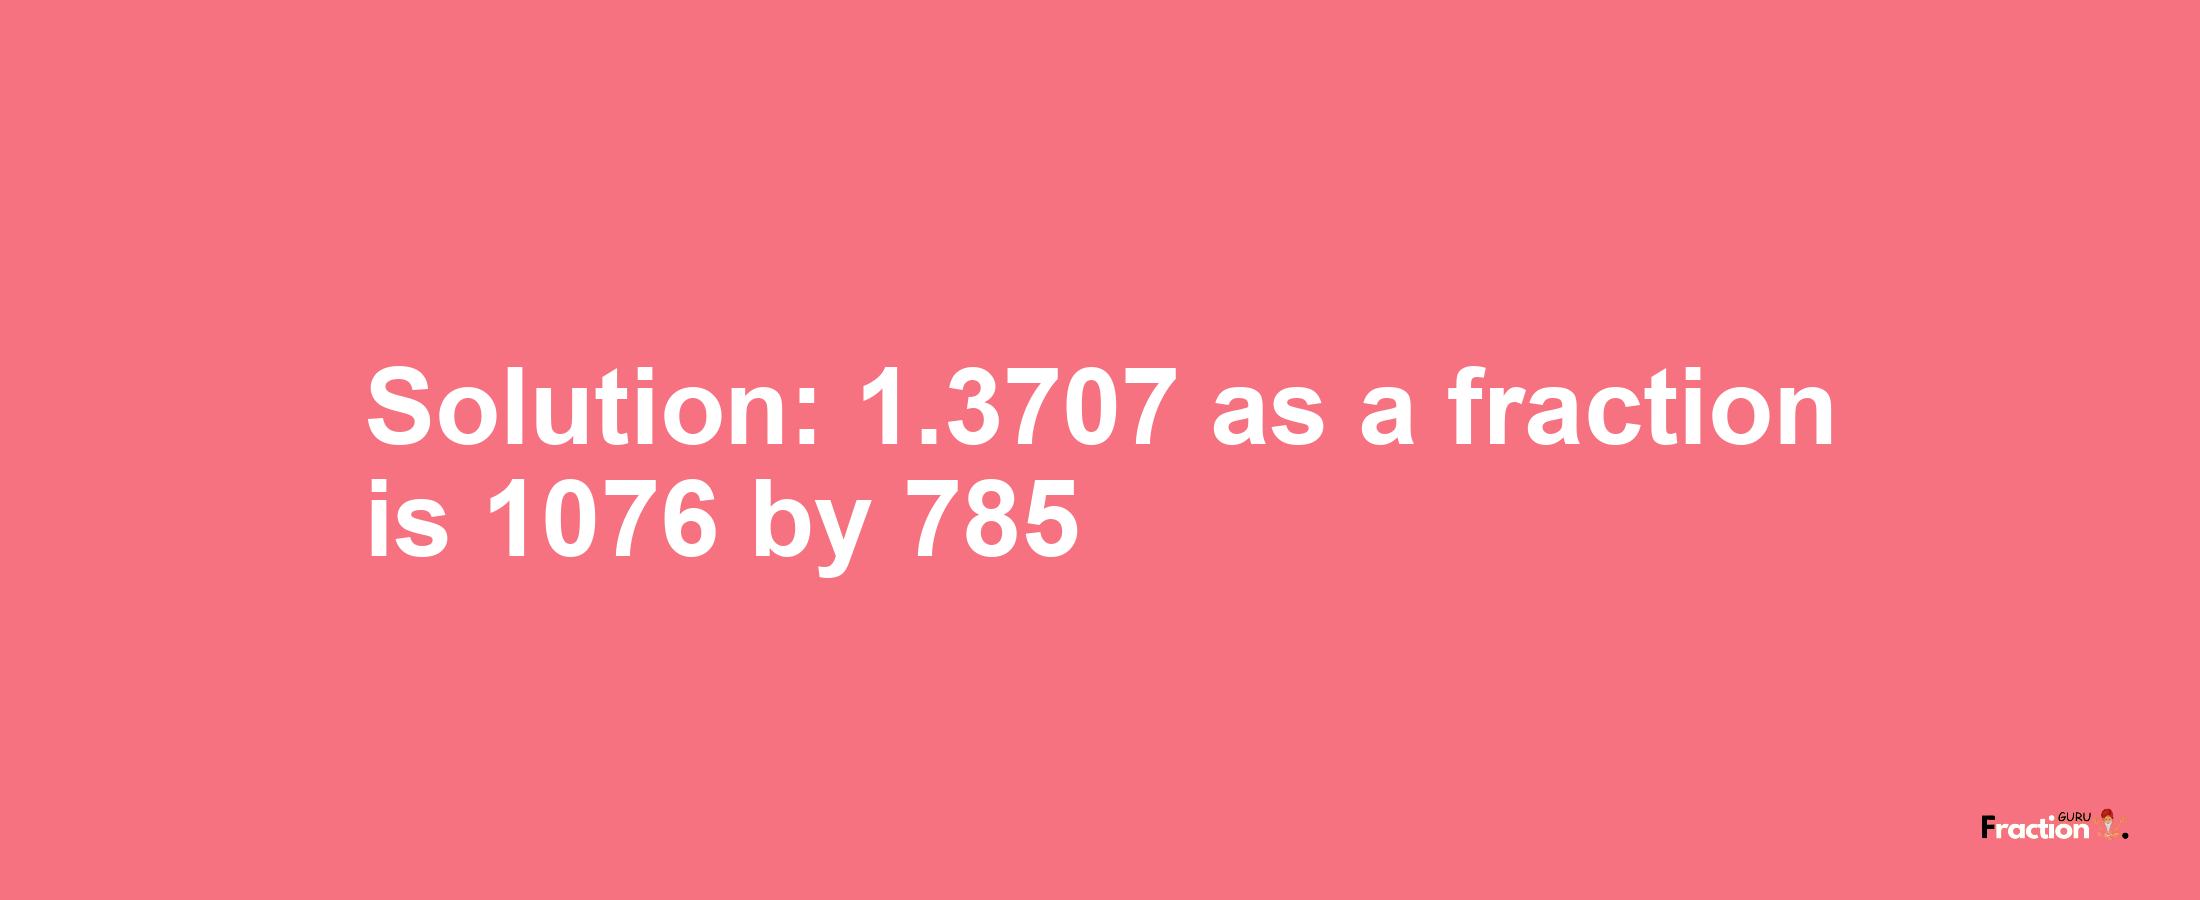 Solution:1.3707 as a fraction is 1076/785